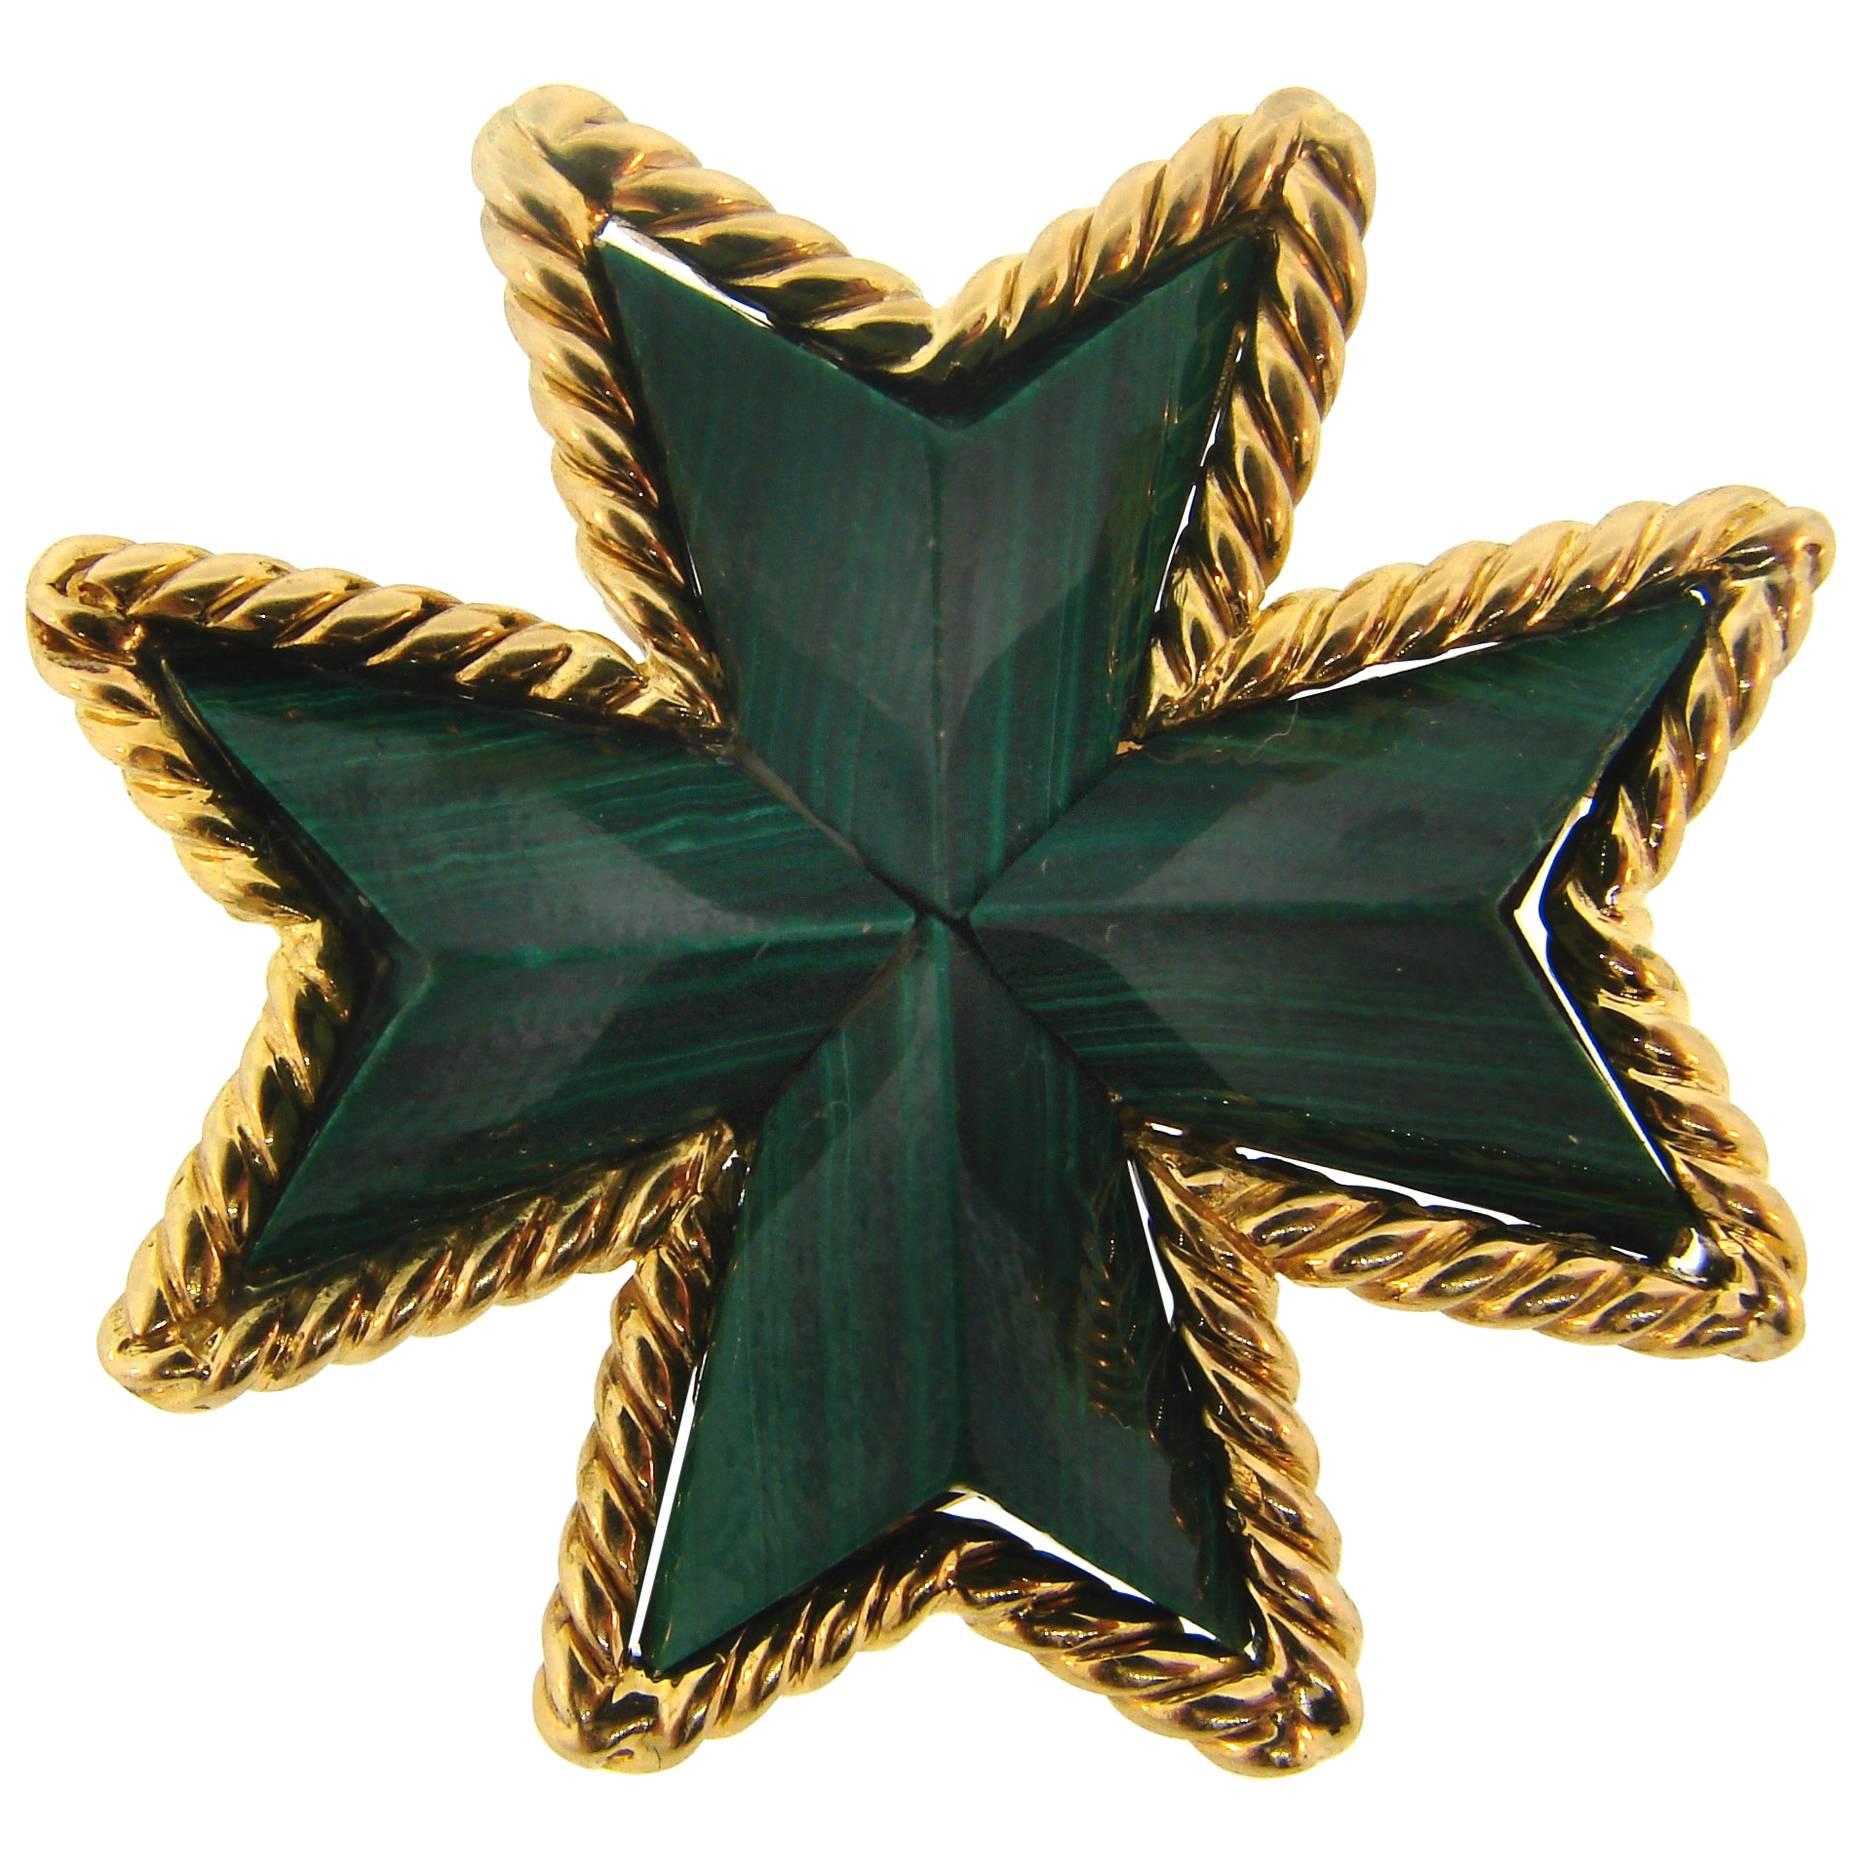 Colorful and elegant Maltese cross pin/pendant created by Tiffany & Co. in Italy. 
It is made of 18 karat (stamped) yellow gold and carved malachite. 
Measurements: 1-3/8 x 1-3/8 inches (3.4 x 3.4 centimeters).
Weight 19.2 grams. 
Stamped with